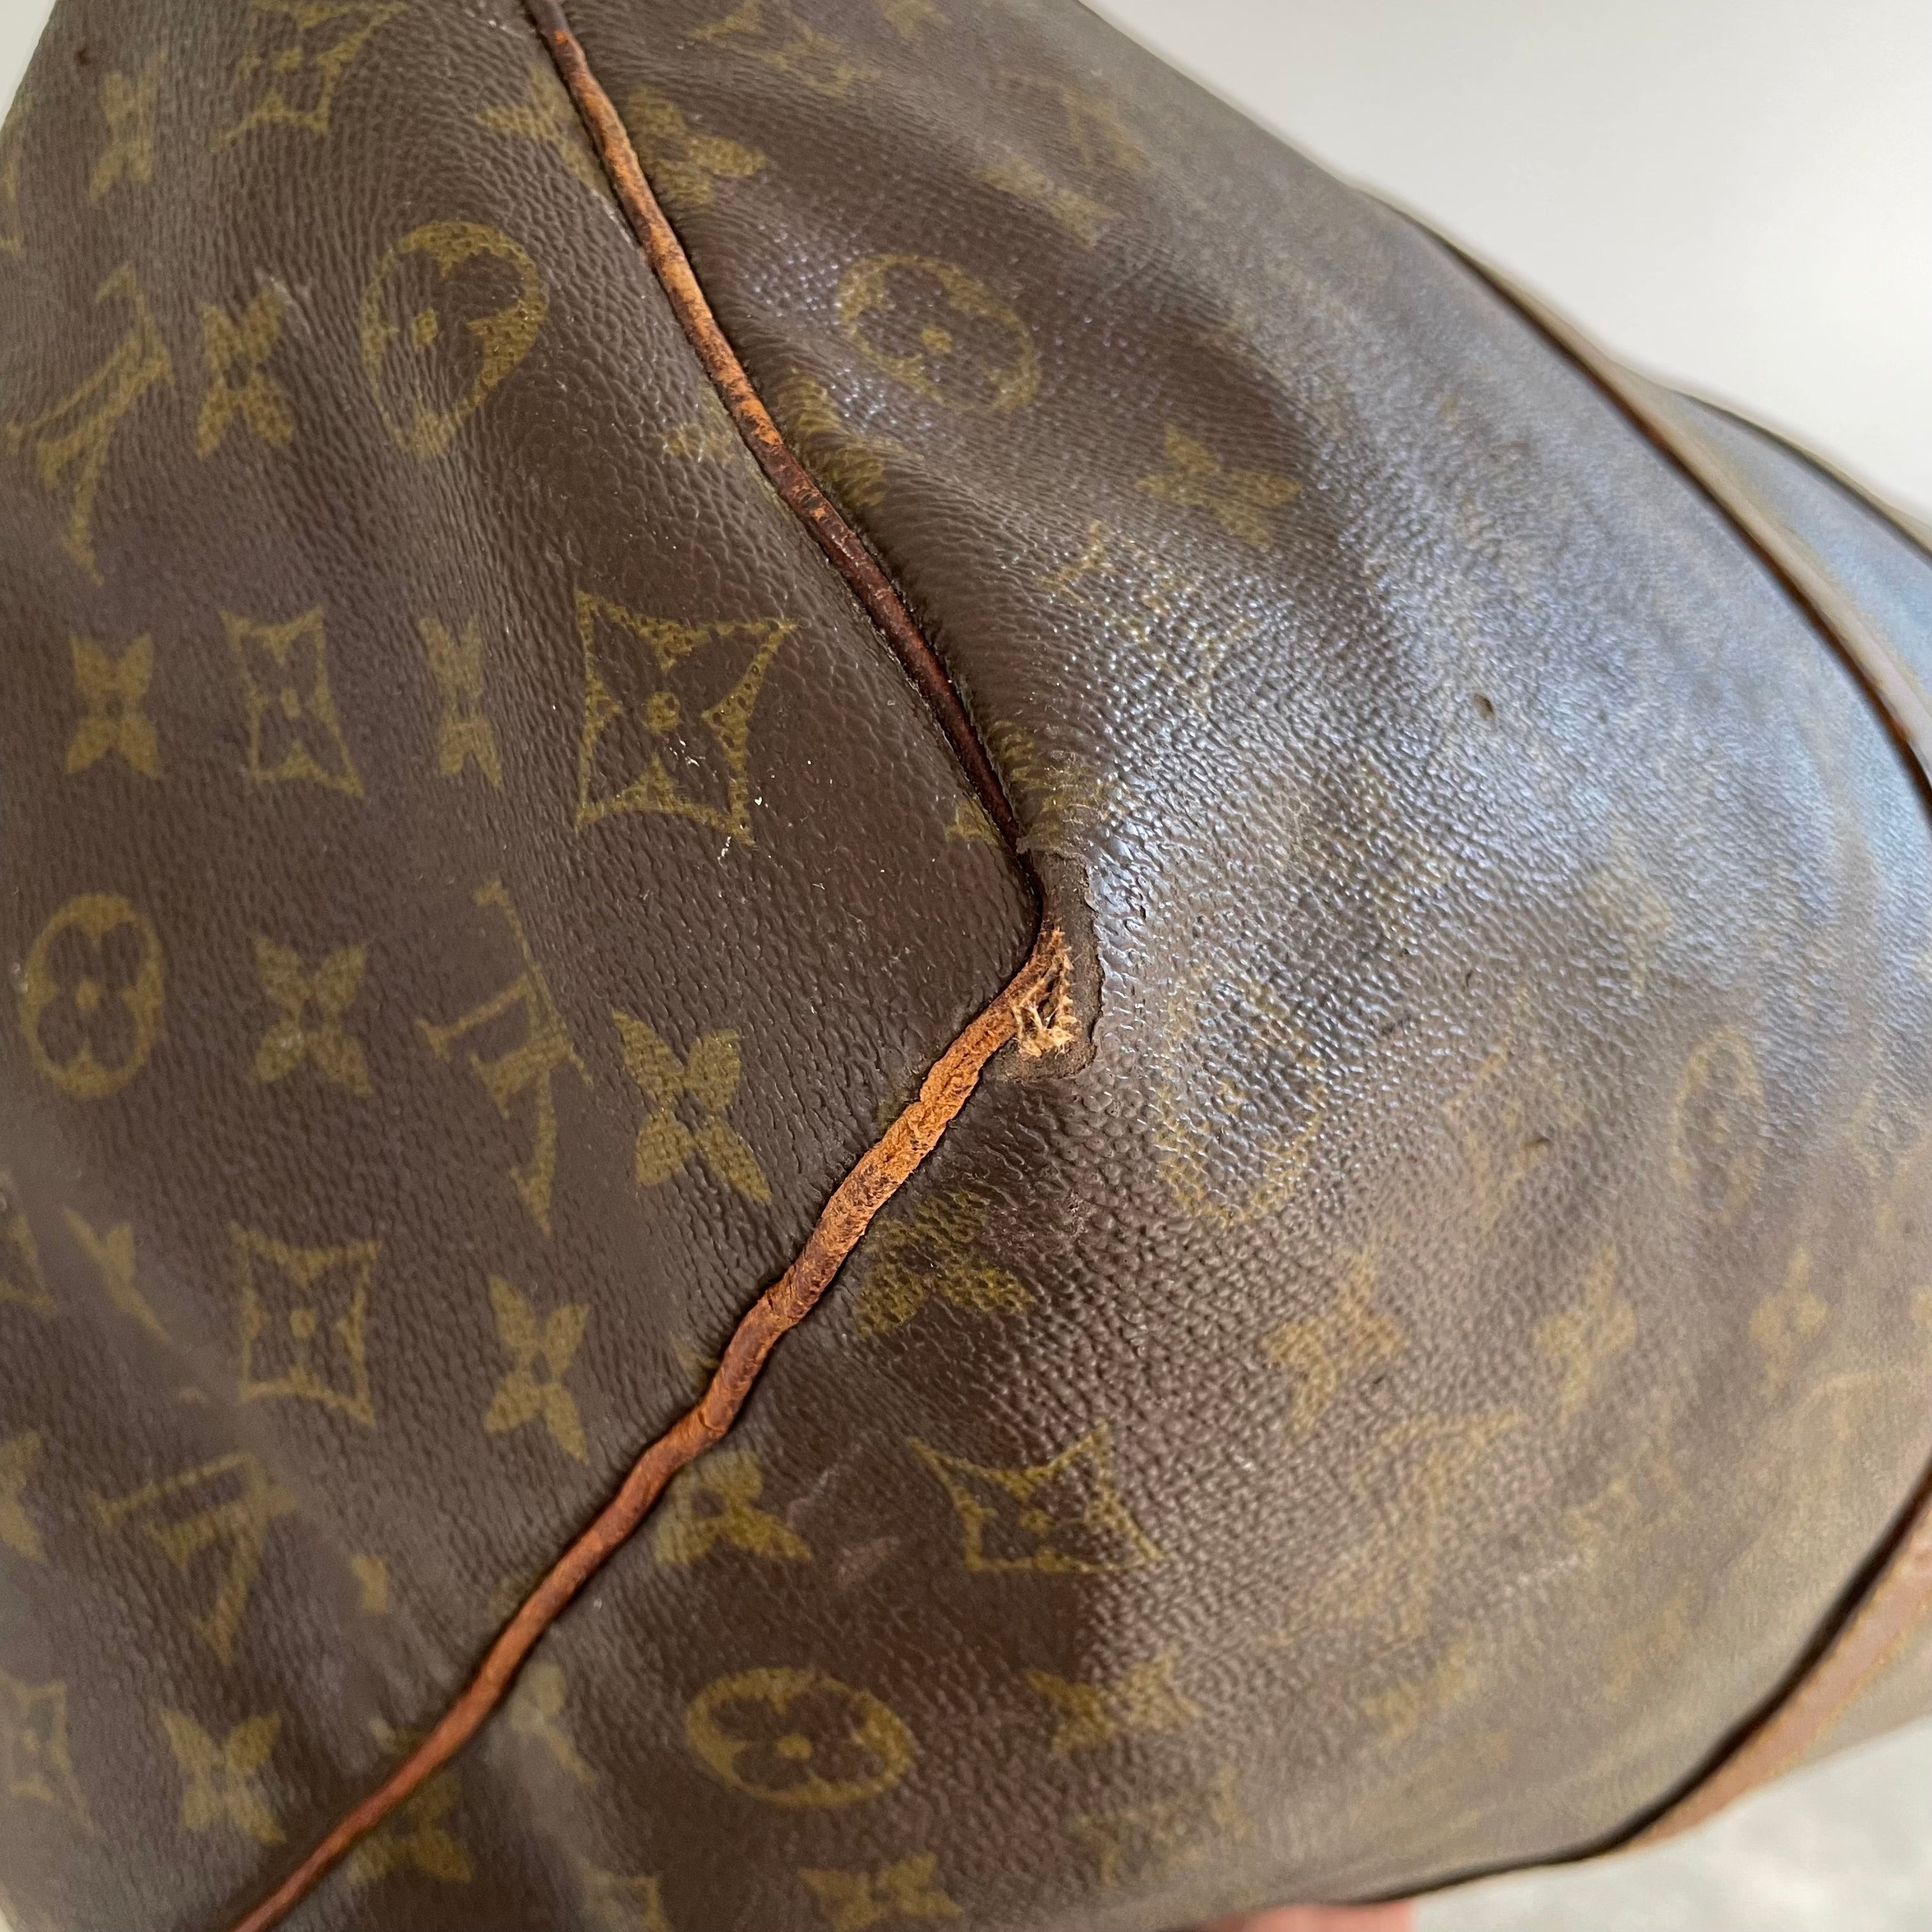 1950s Louis Vuitton Duffel Bag For Sale at 1stDibs